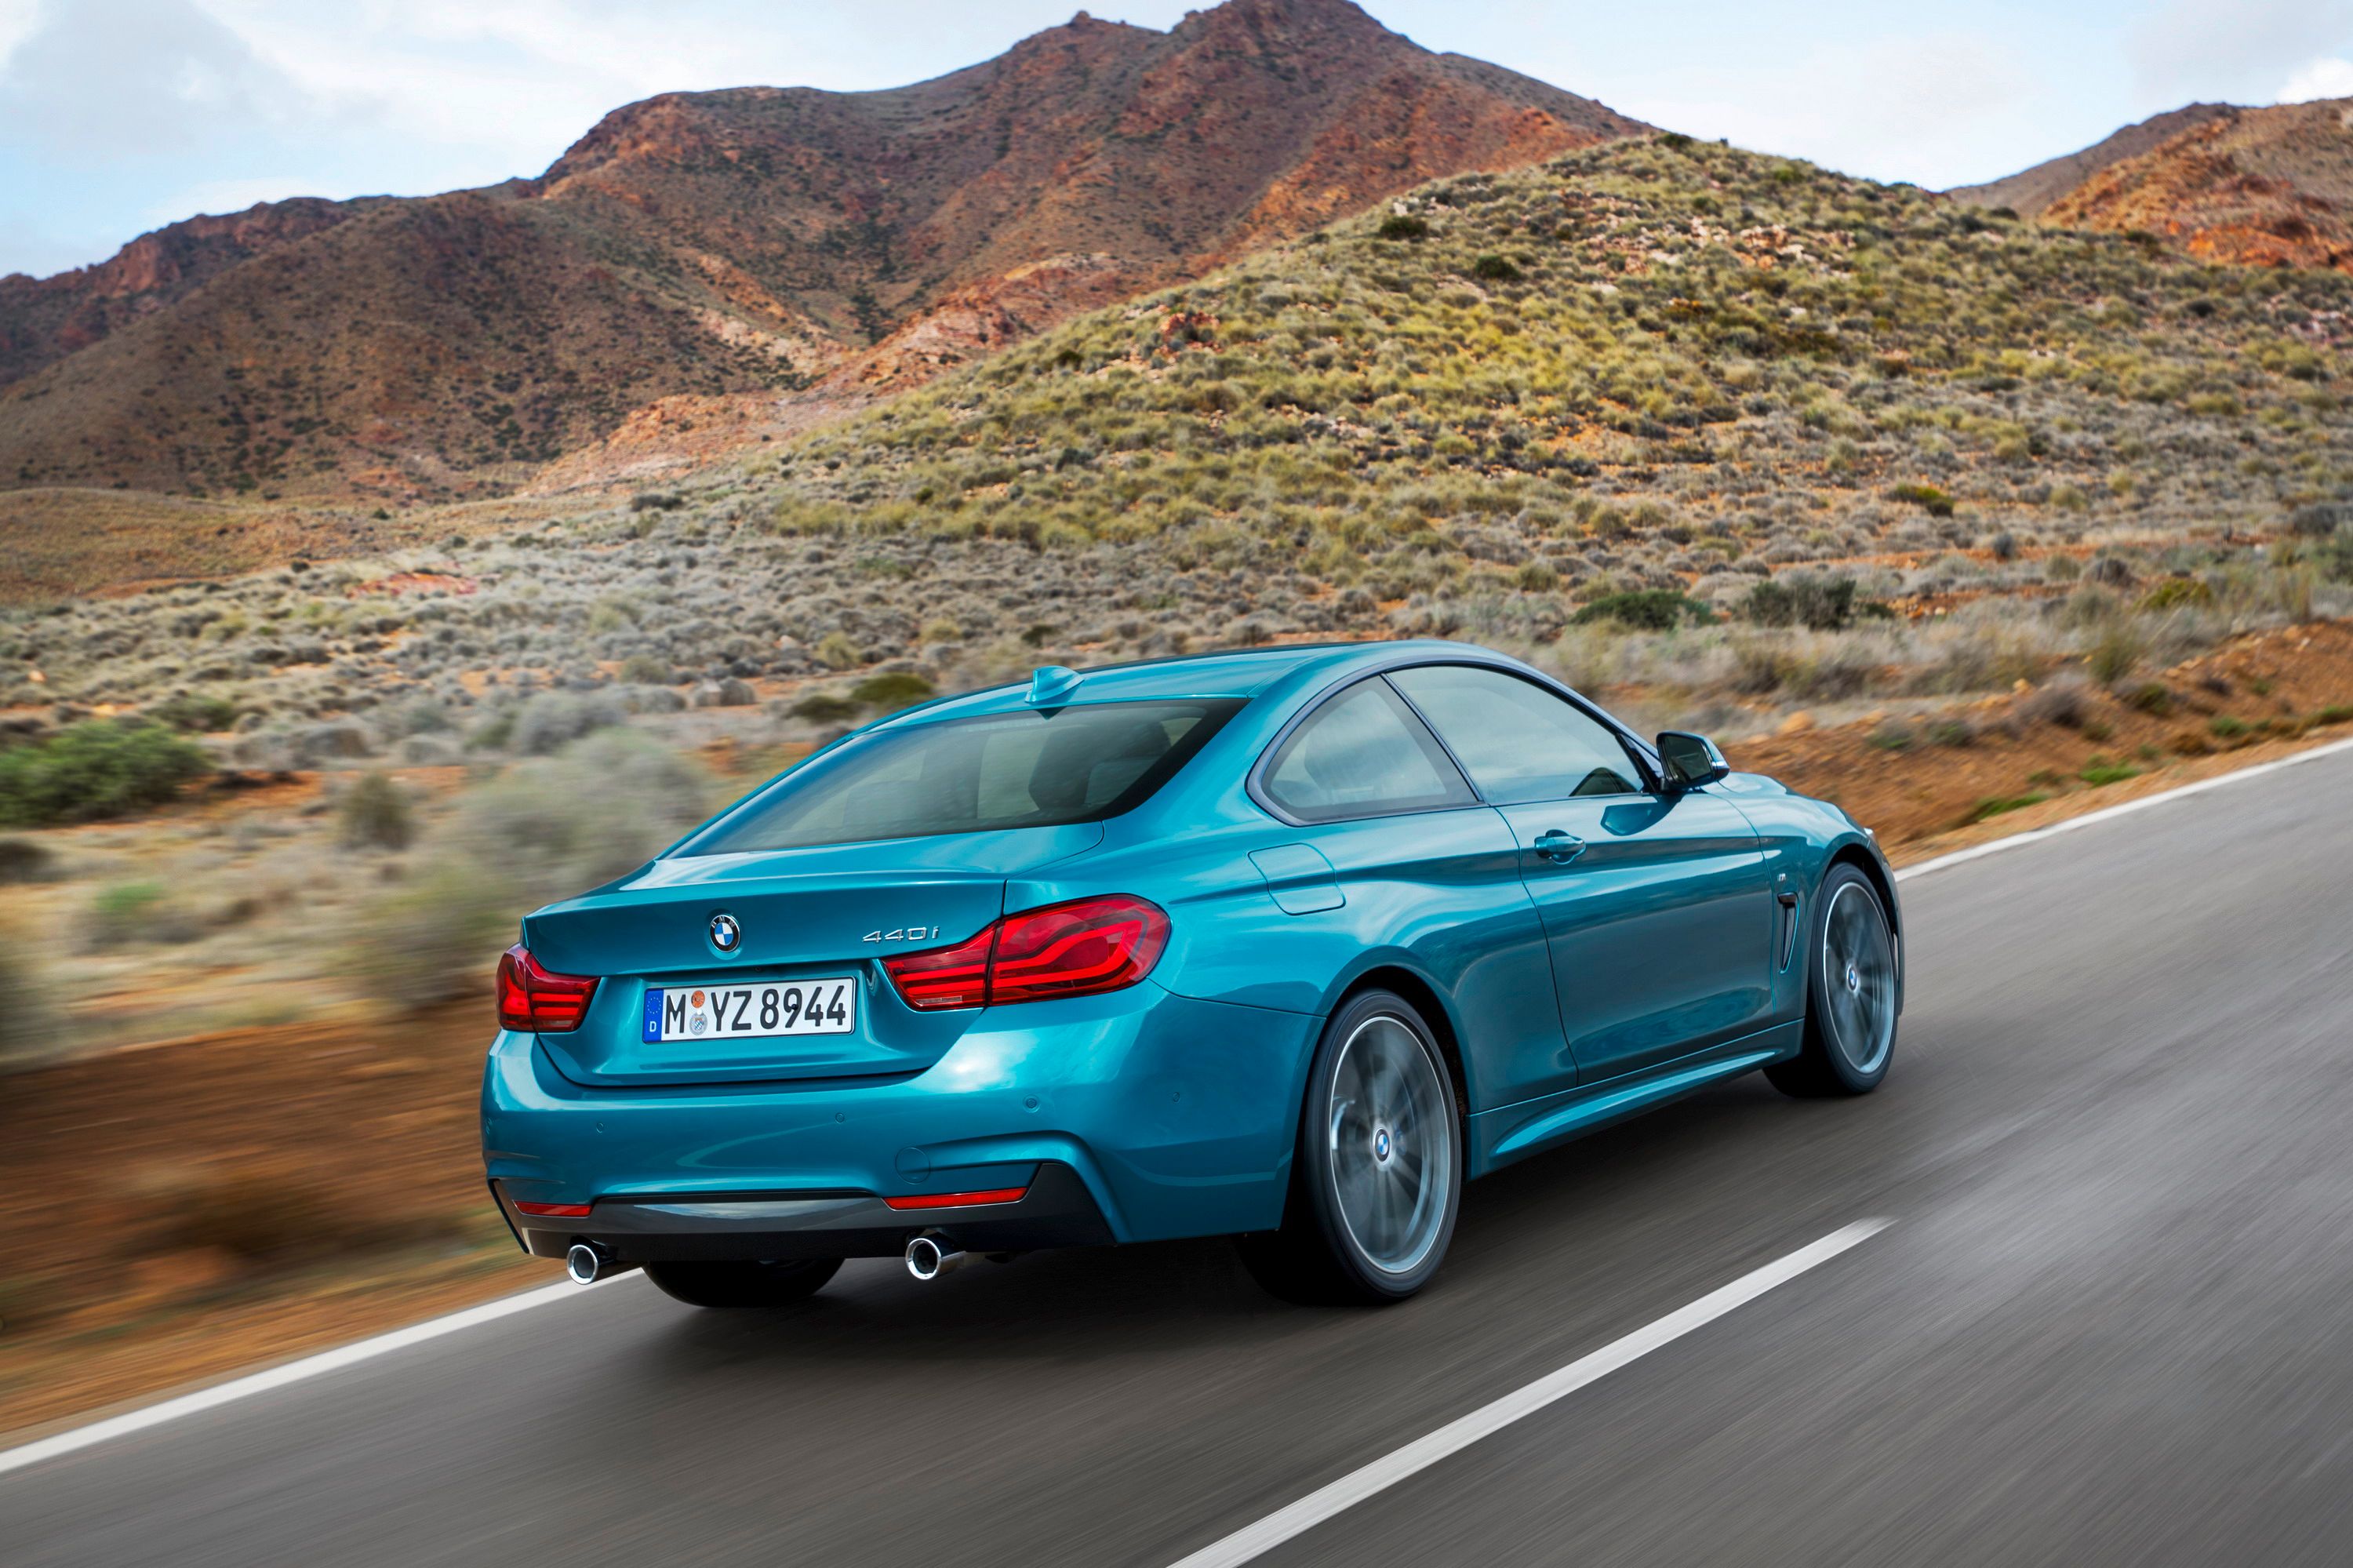 2018 BMW 4 Series Coupe